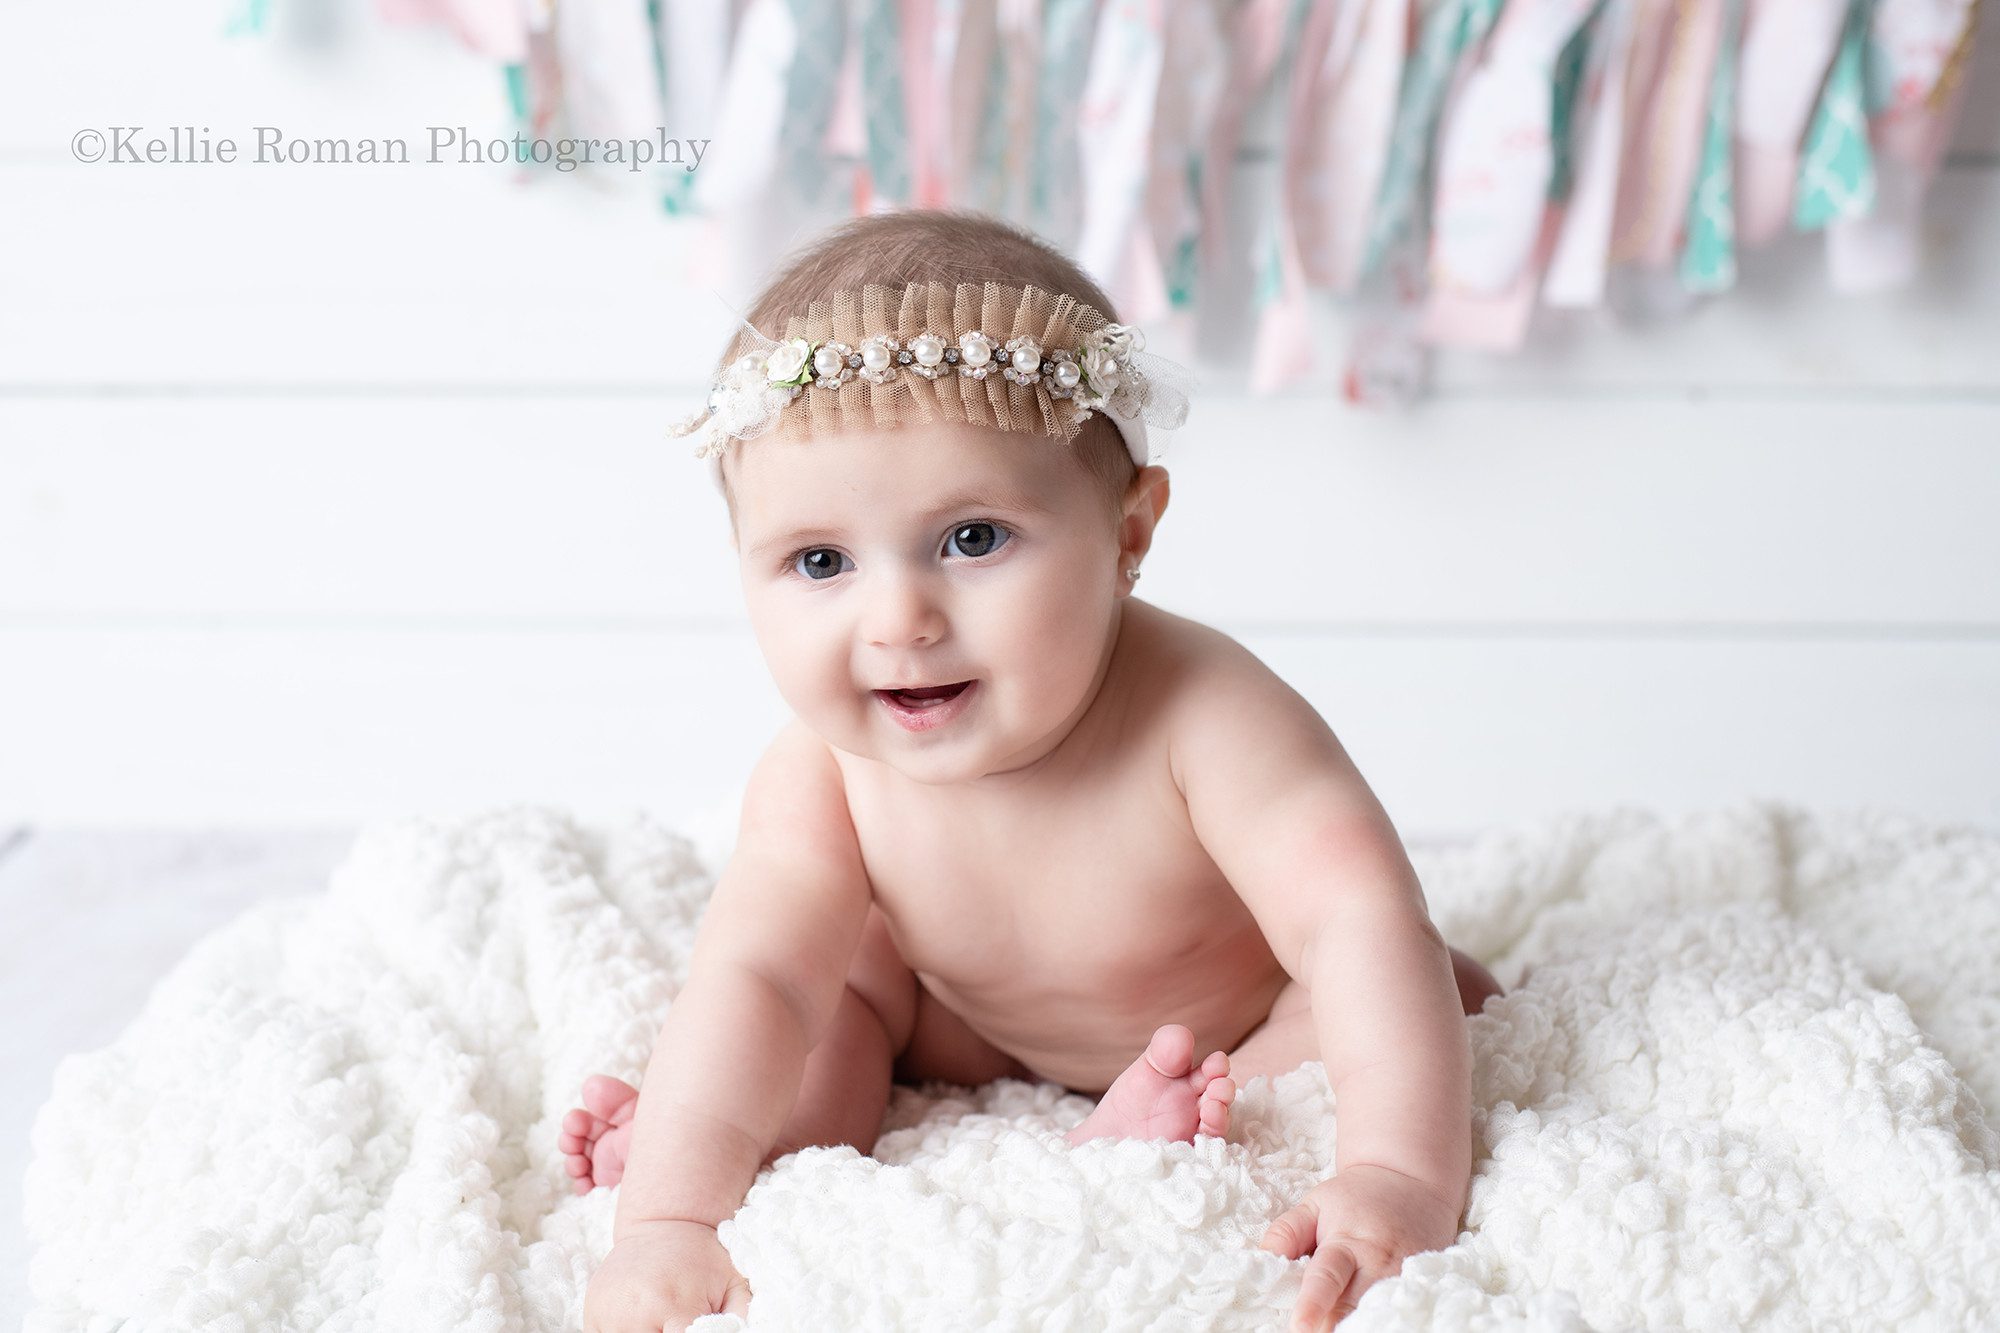 six month milestone a baby girl is smiling while having her pics taken in a Milwaukee photographers studio located in greendale Wisconsin. The girl is naked and sitting on a white fluffy blanket in front of a white wood backdrop and pink banner. She has a girlie headband on.